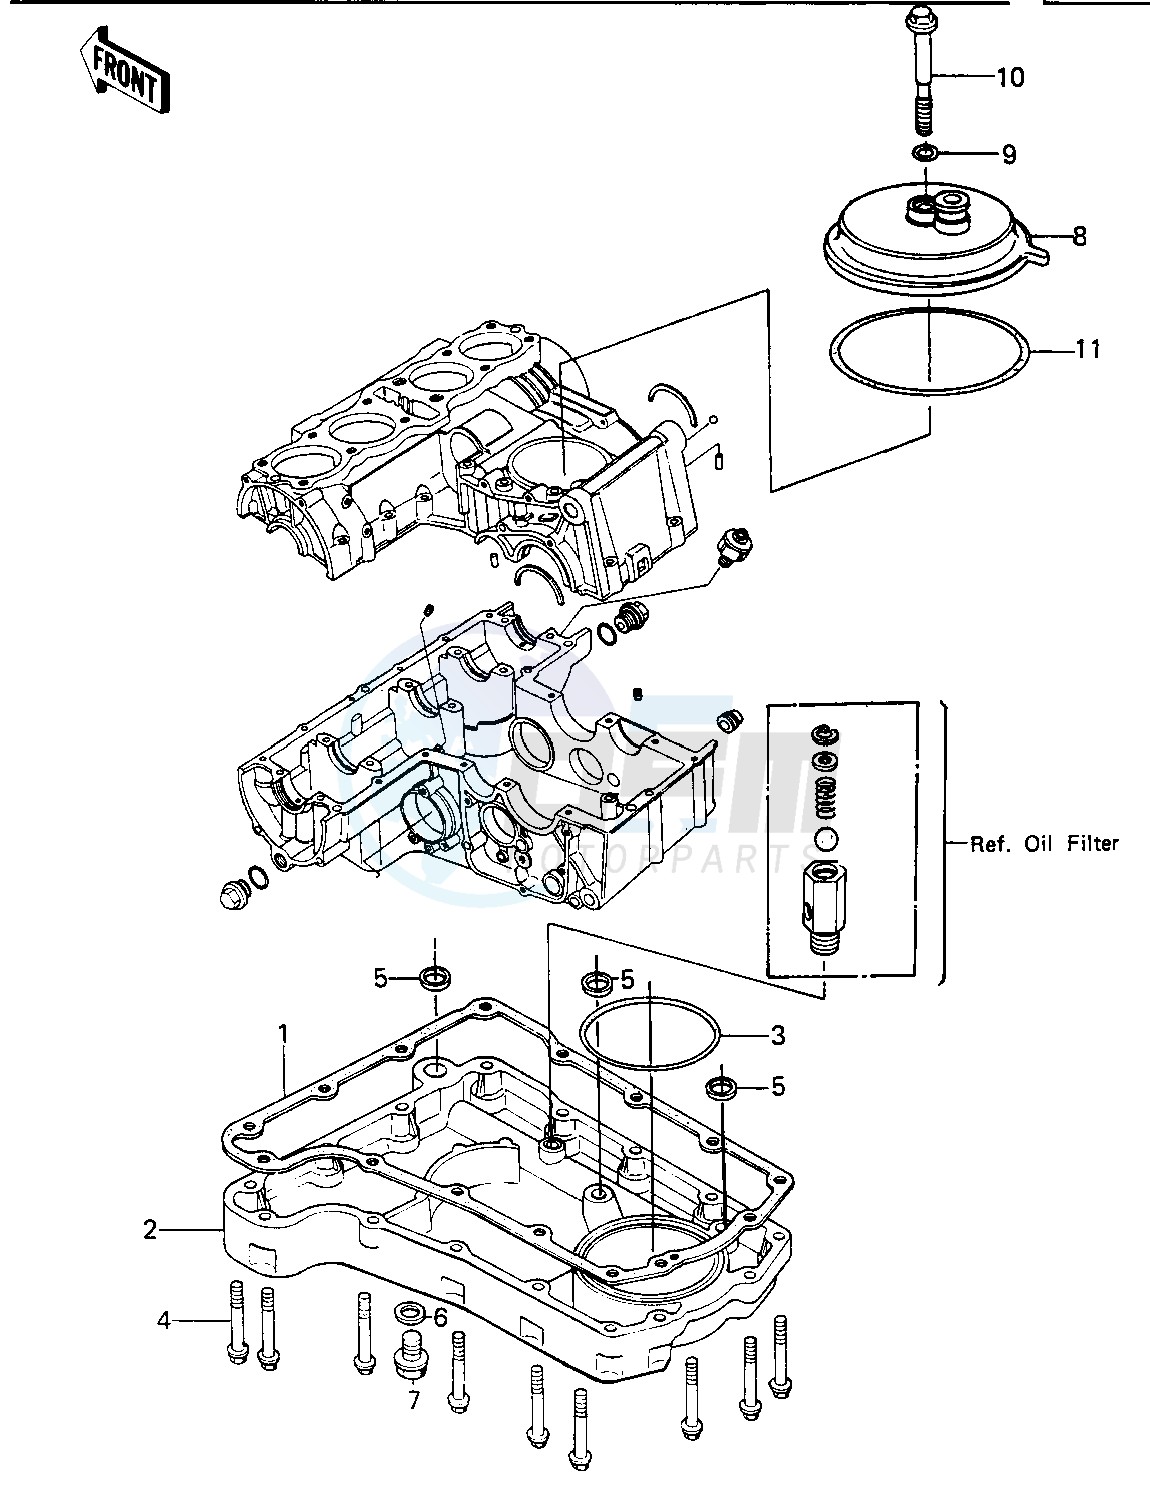 BREATHER COVER_OIL PAN -- 80 KZY 50-E1- - blueprint